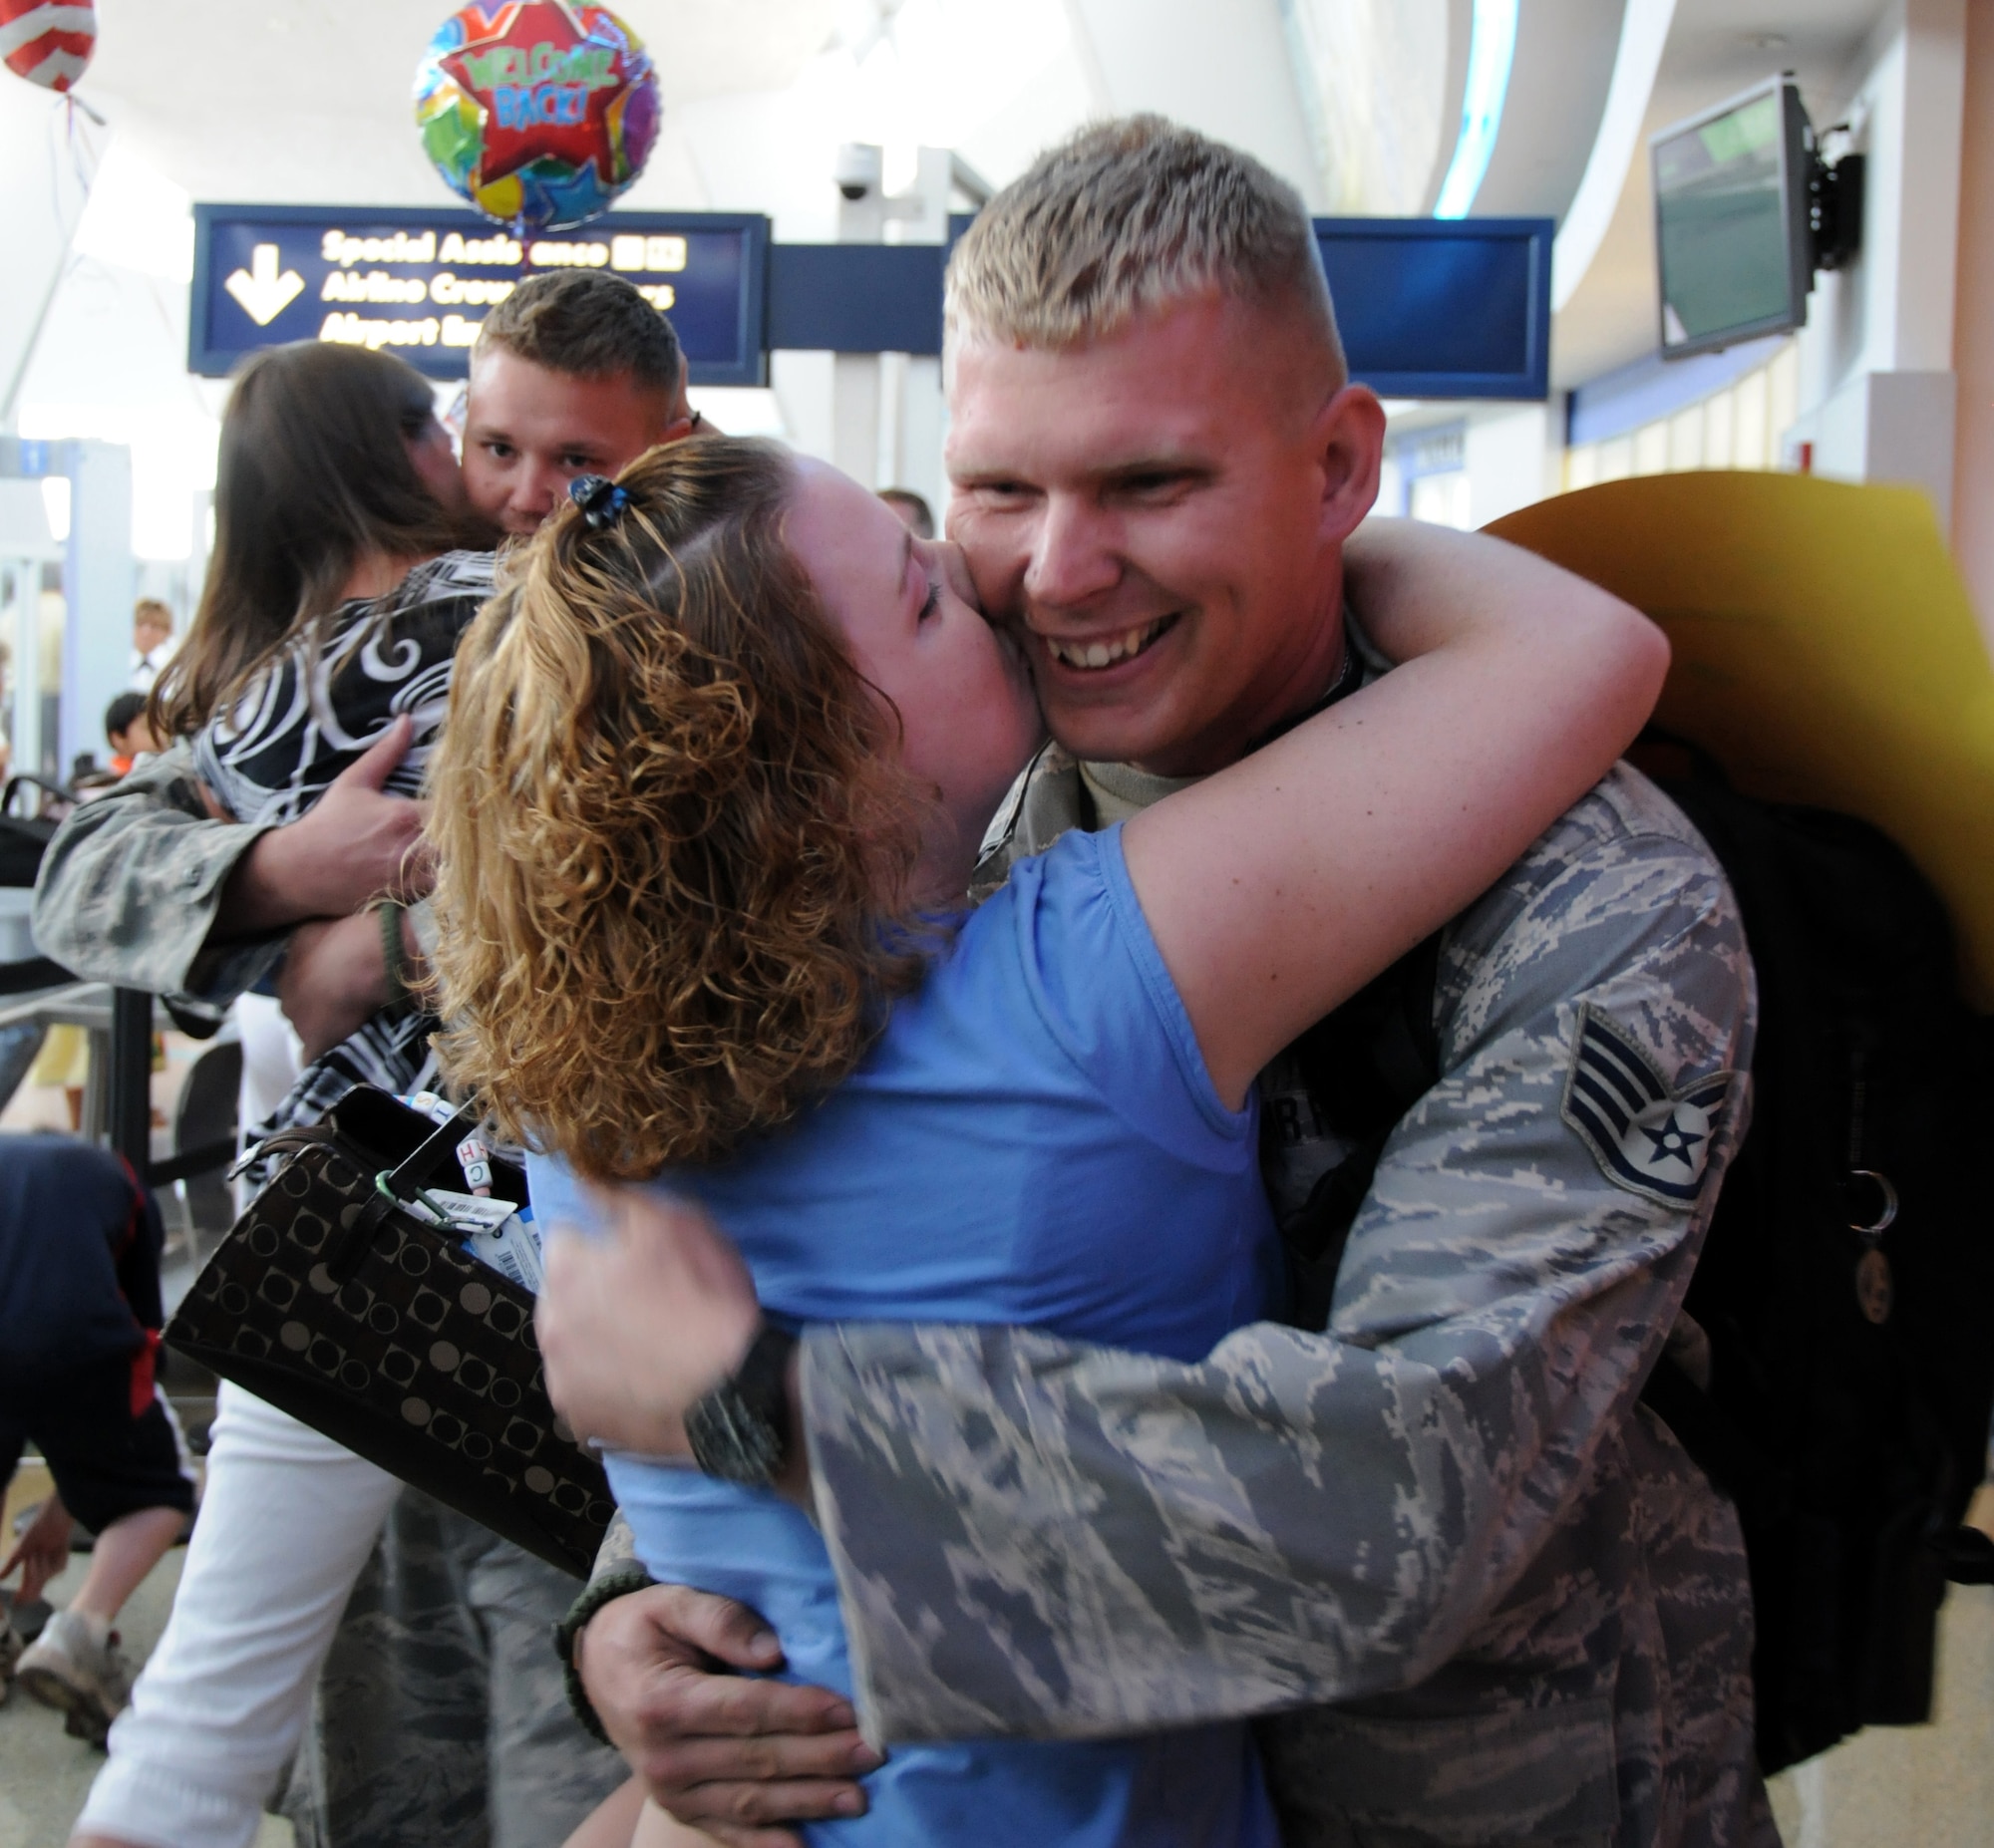 Staff Sgt. Ernest Covell receives a warm embrace from his wife. Senior Airman Derek Cutter is in the background with his girlfriend. 